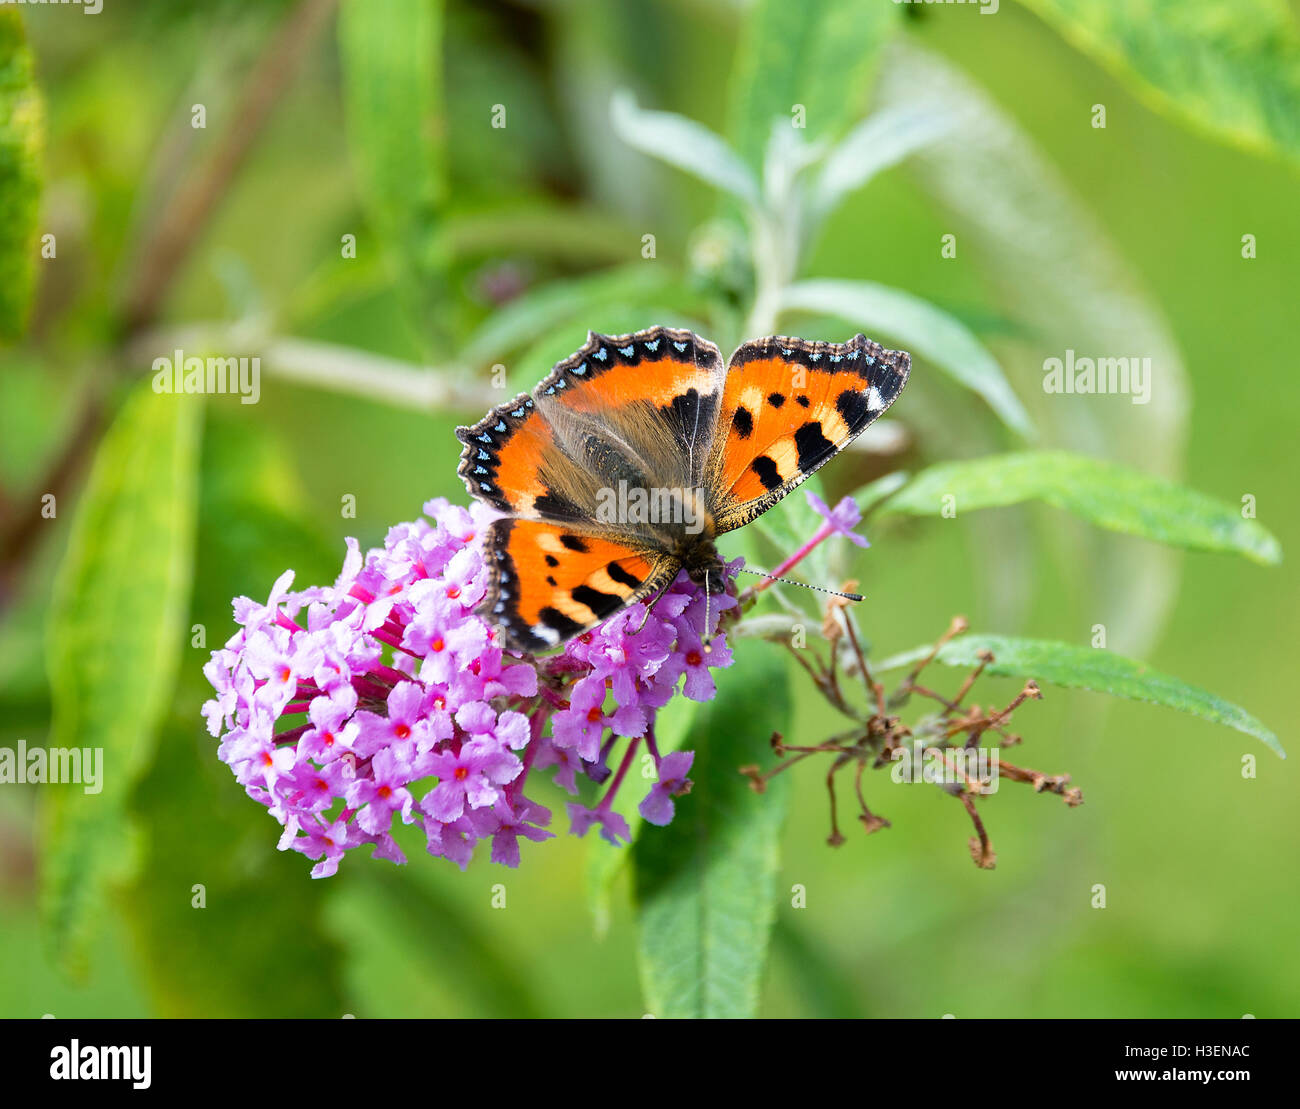 Beautiful Small Tortoiseshell Butterfly Feeding on a purple Buddleja Flower in a Garden in Alsager Cheshire England UK Stock Photo